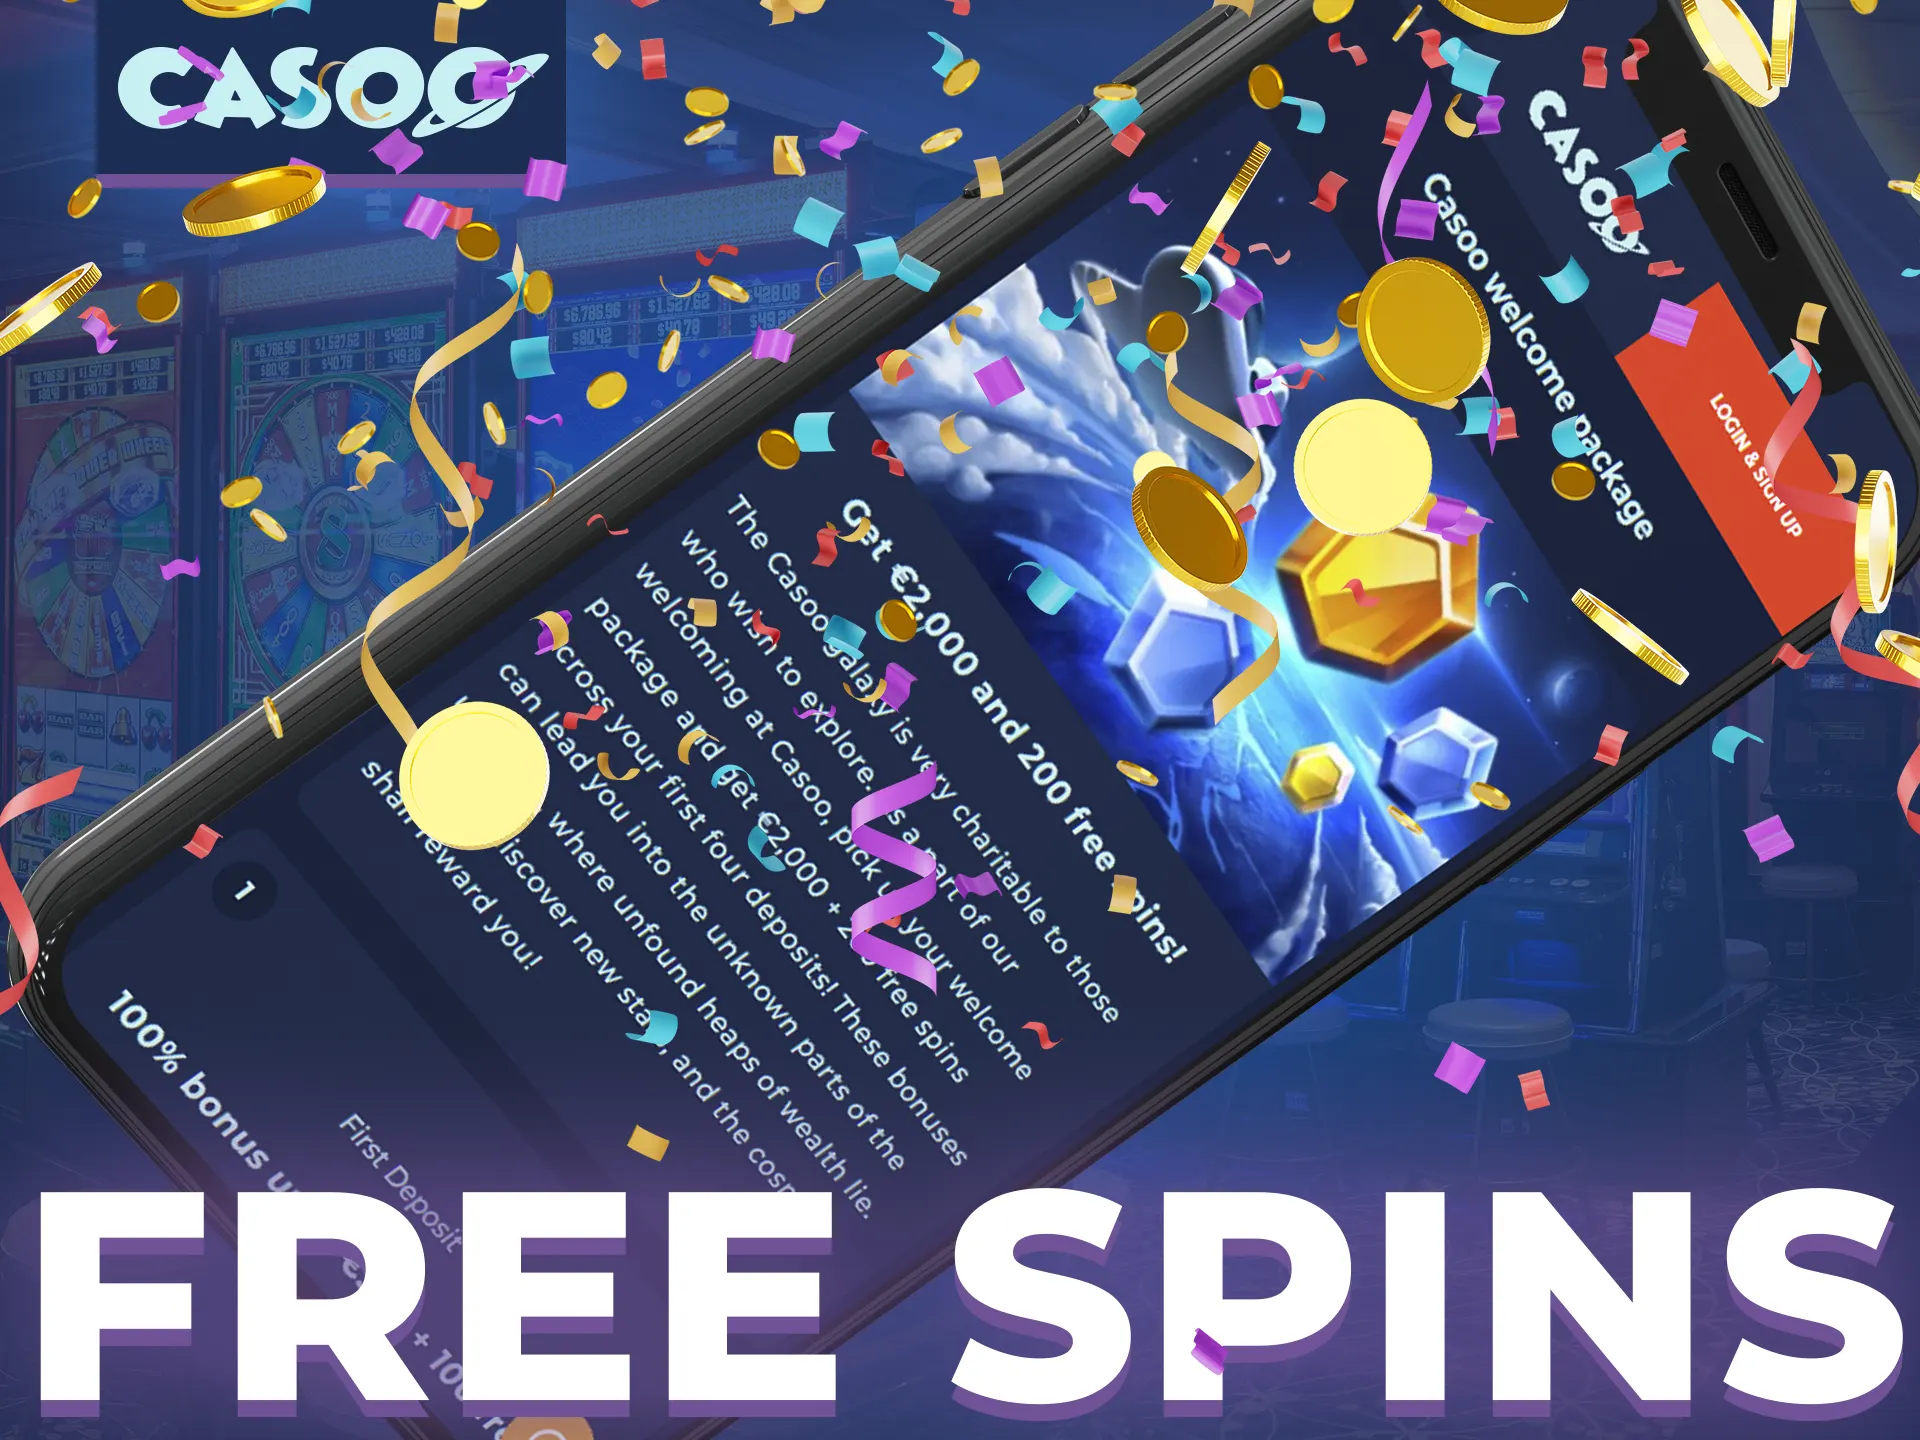 Learn hot to get free spins at Casoo.